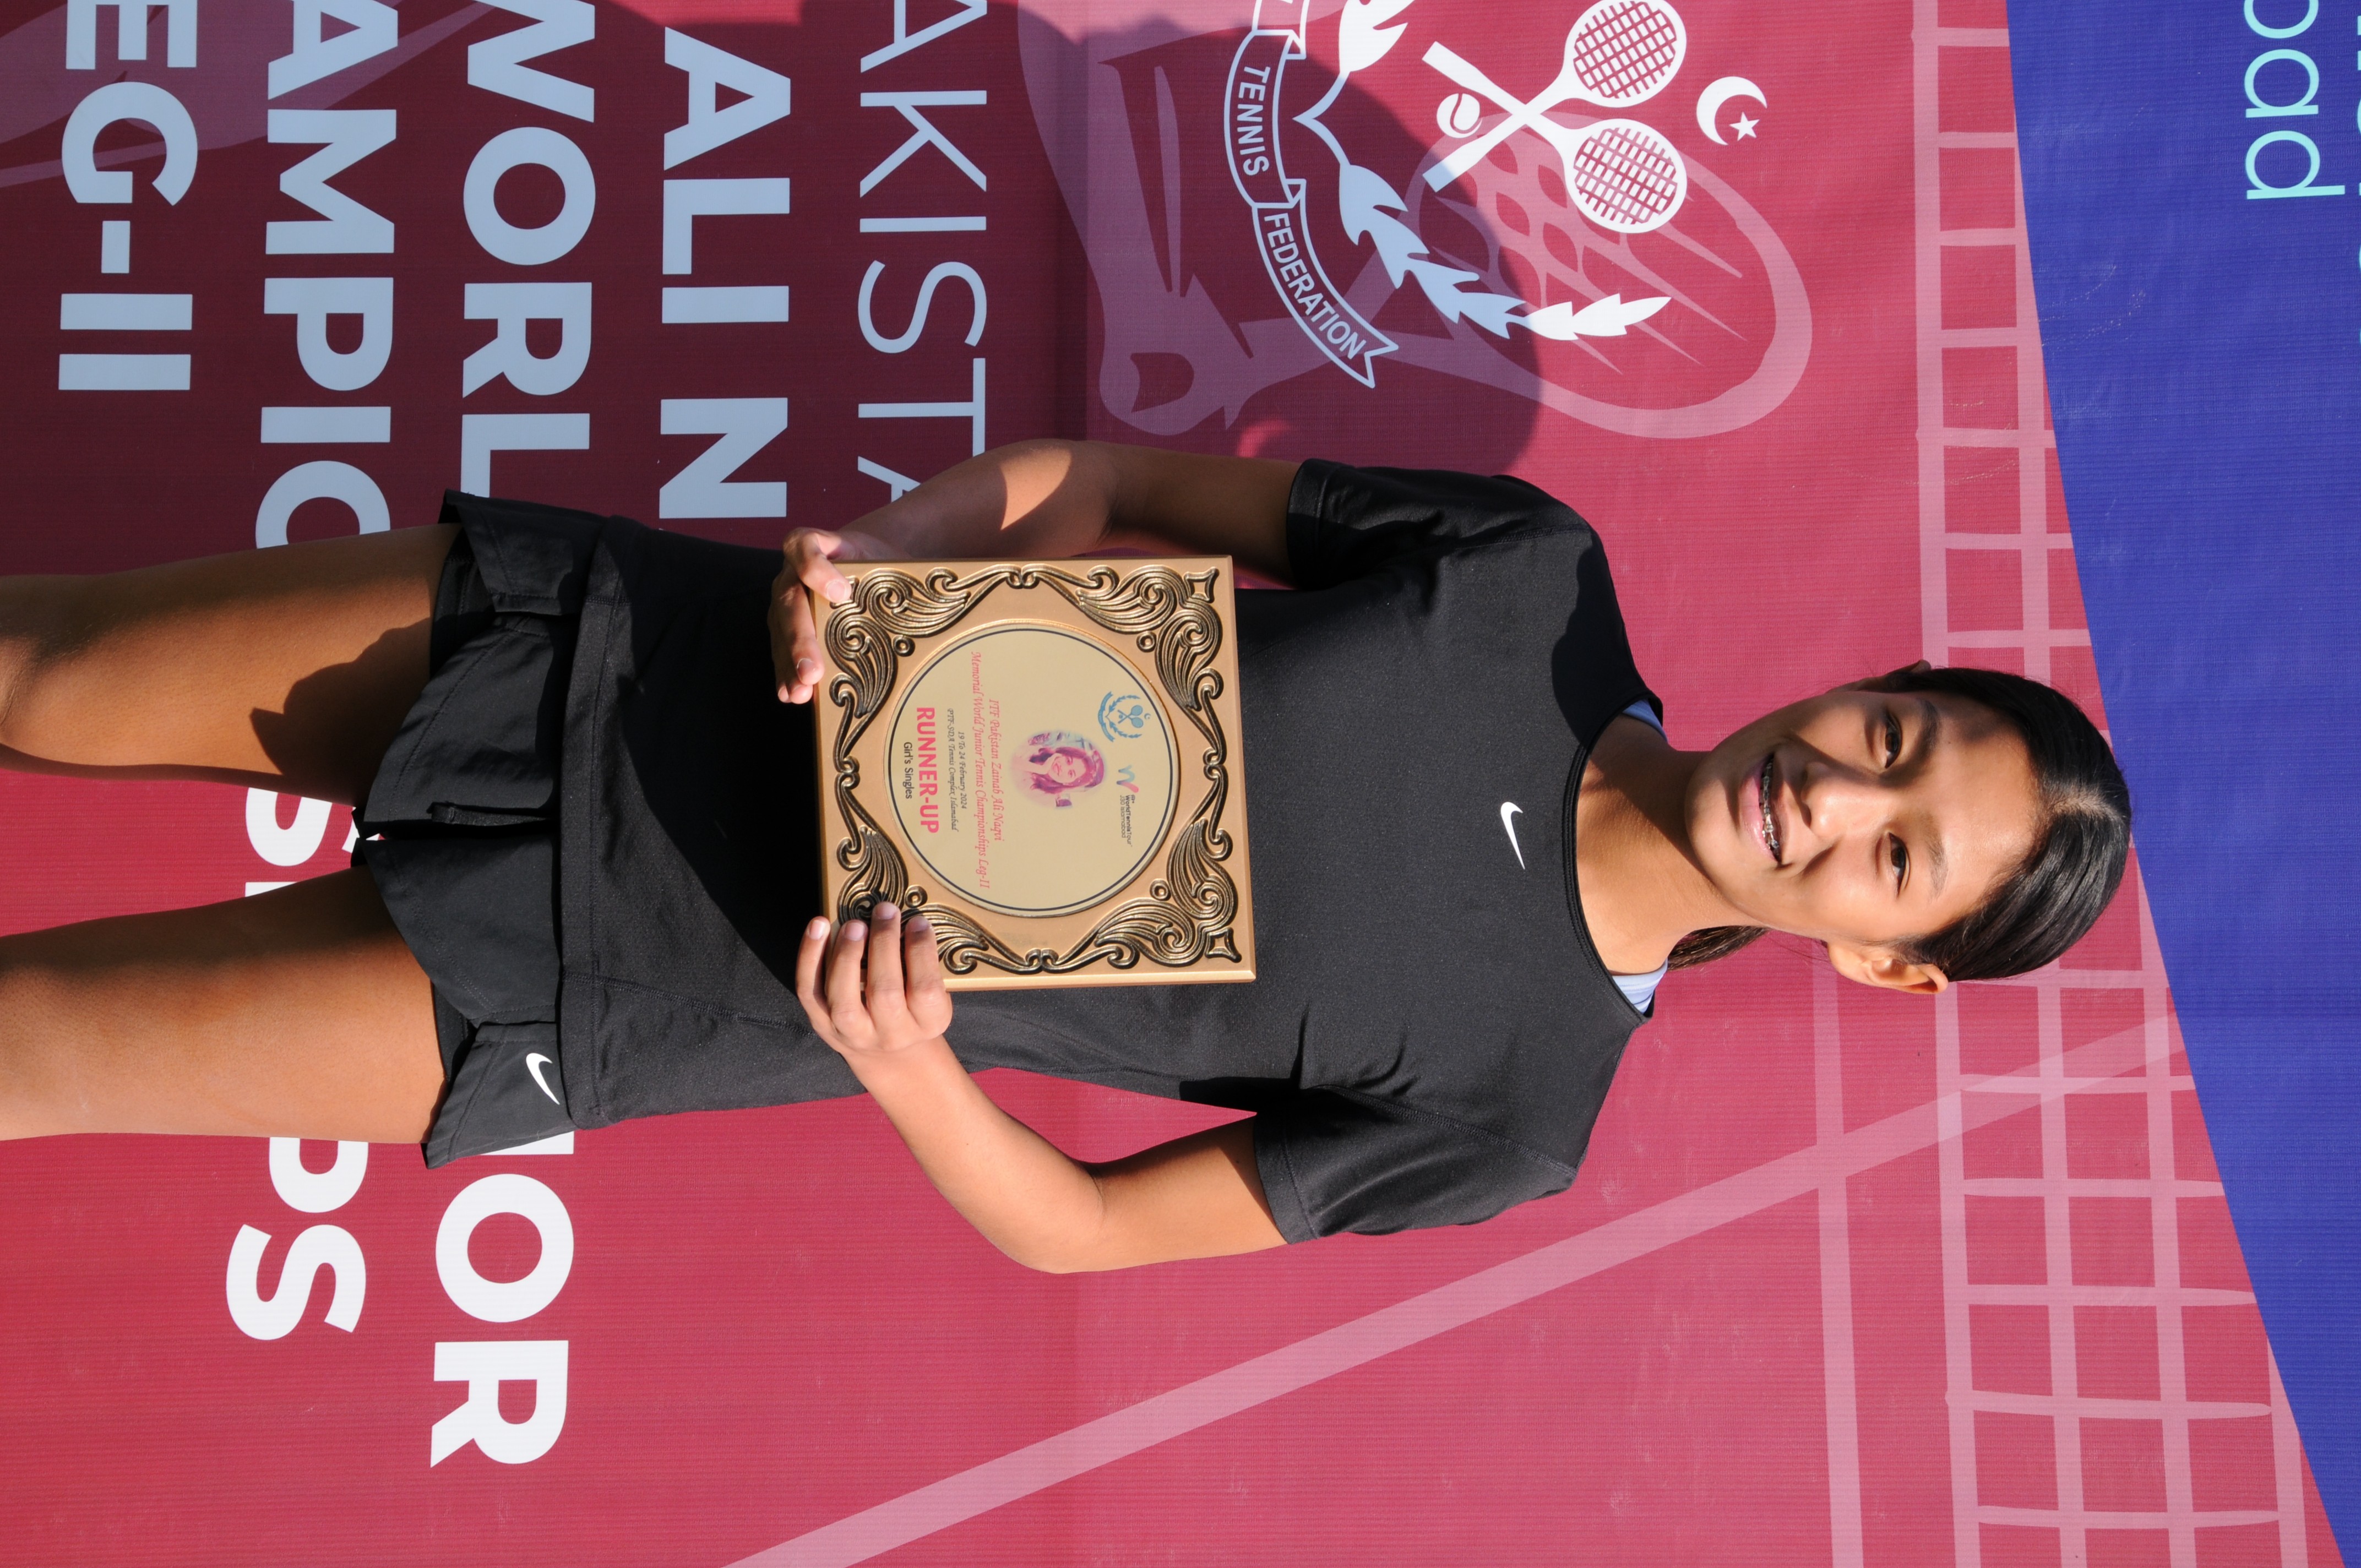 A winning tennis player posing with her trophy